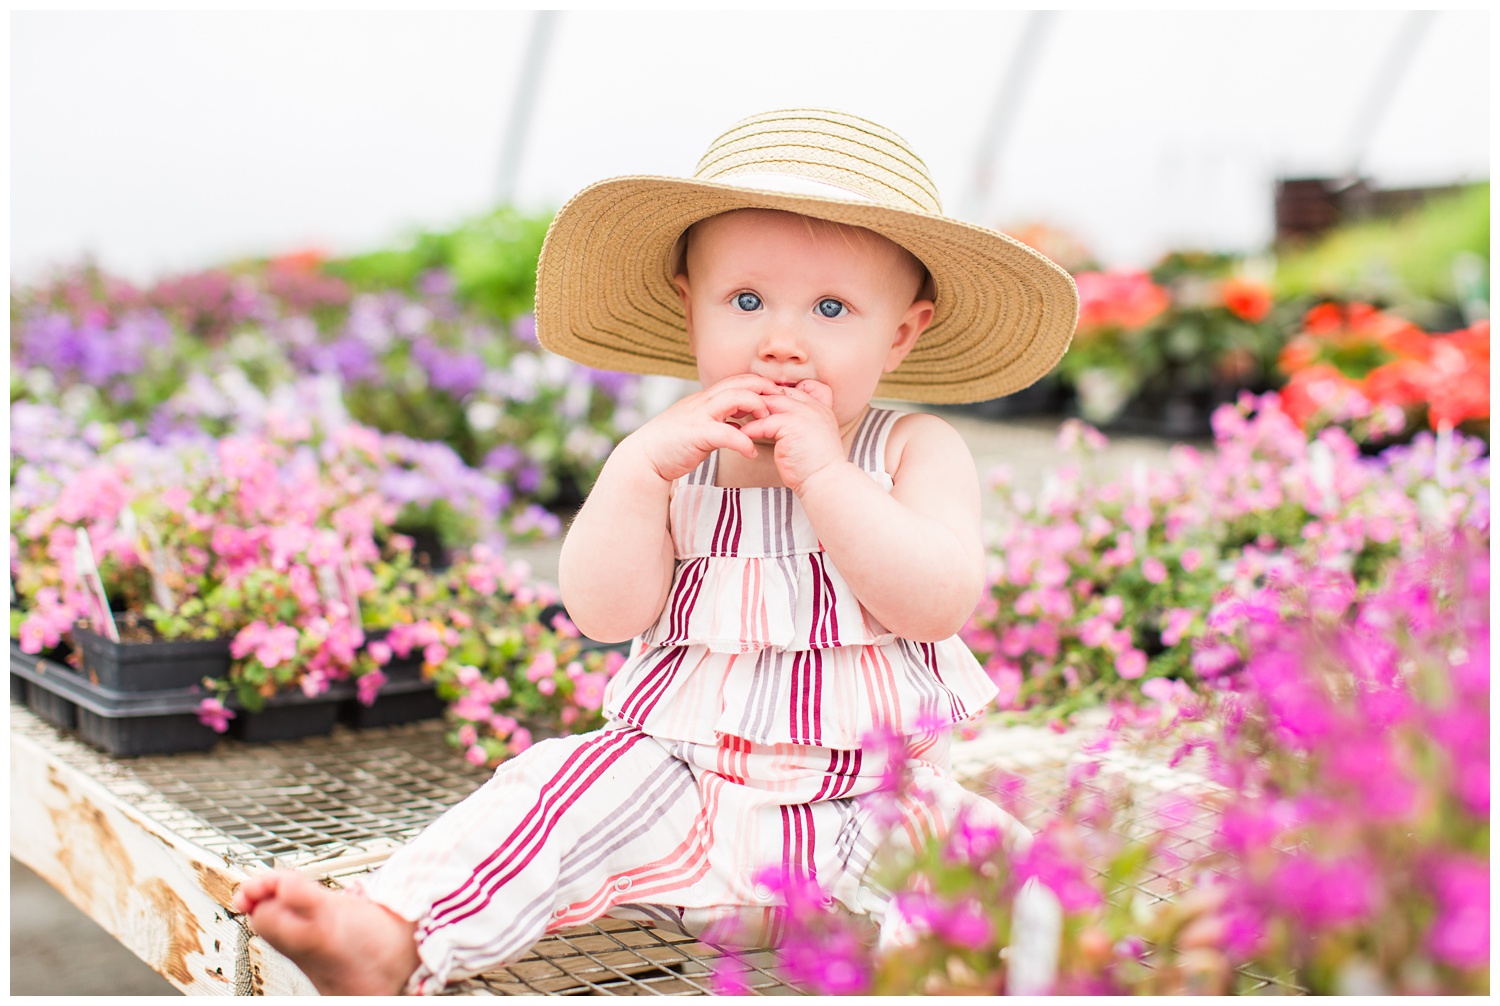 Baby Ivy sitting among florals in a greenhouse wearing a fun floppy hat.